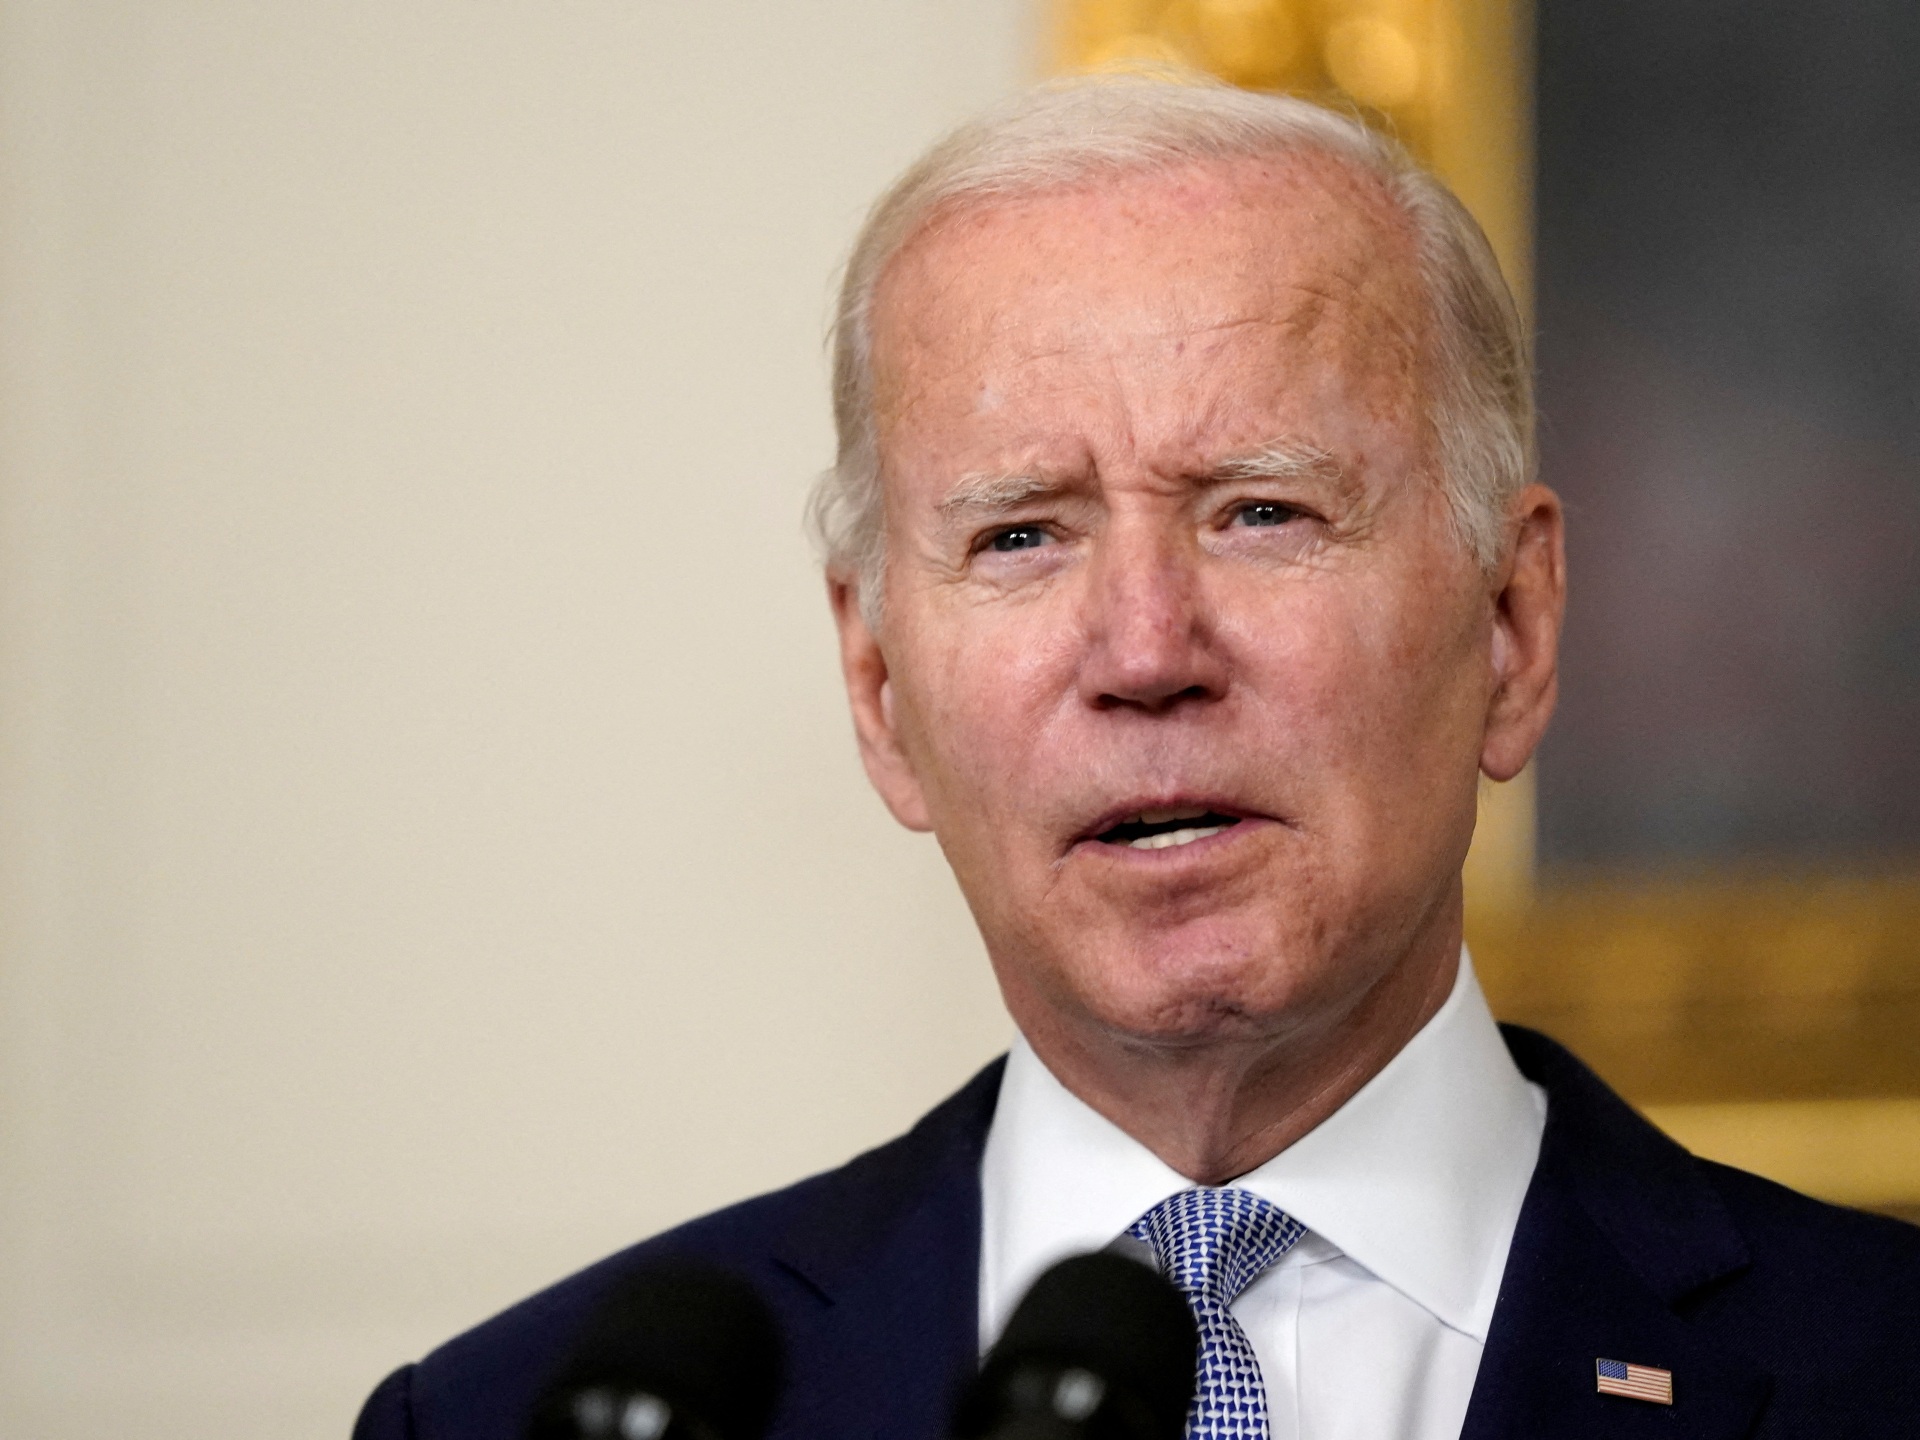 Biden ‘reviewing’ ties with Saudi Arabia amid anger over oil cuts